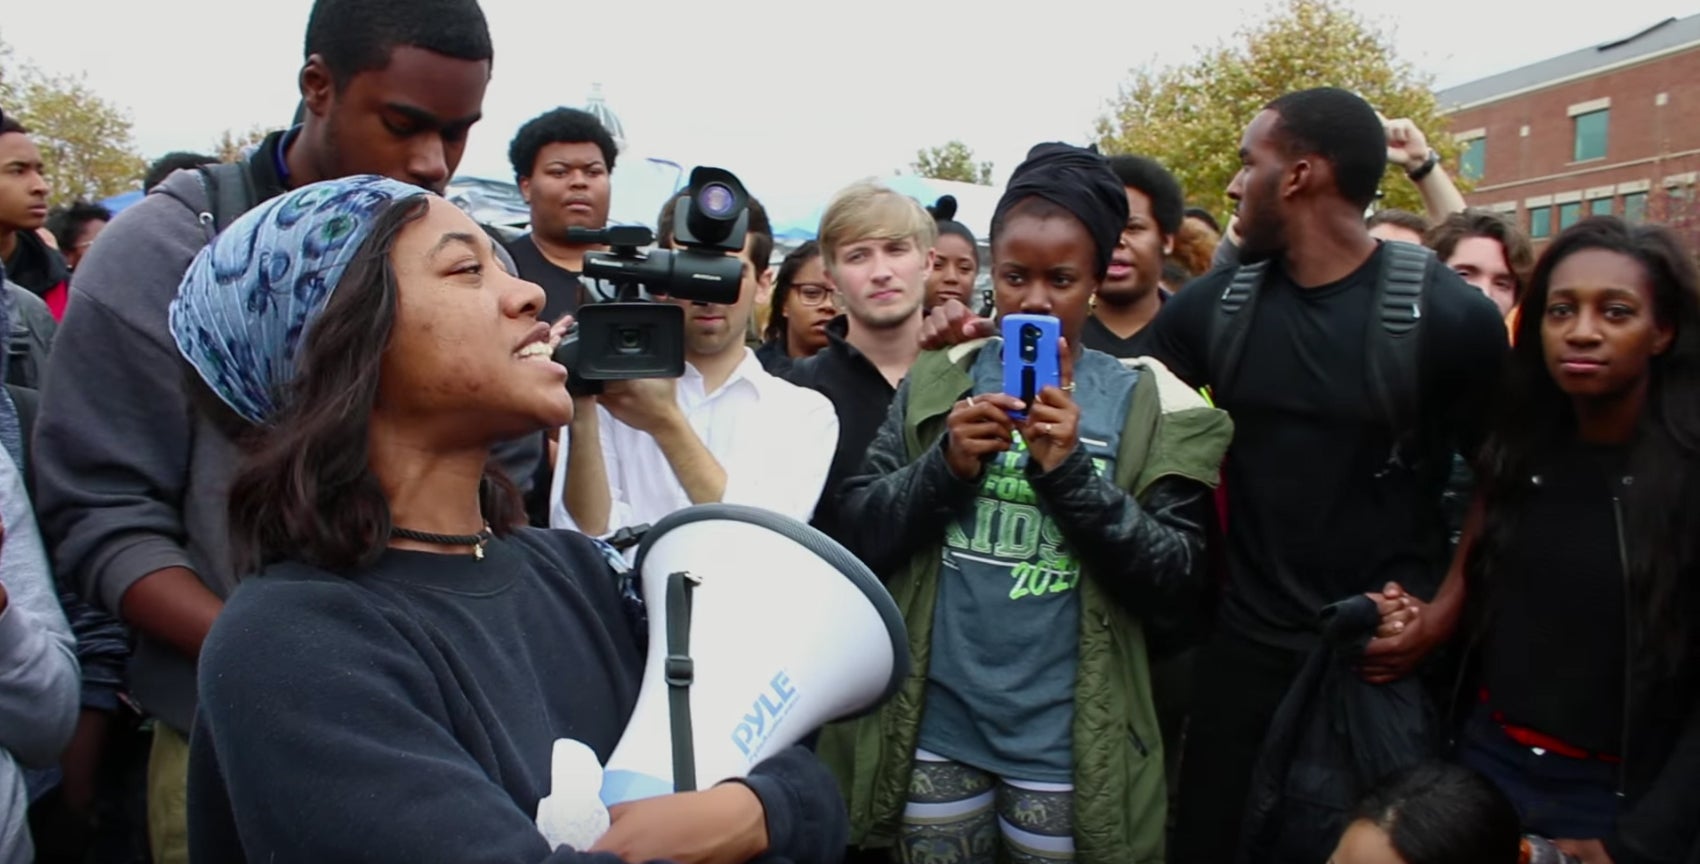 Watch a Film by Mizzou Students Documenting Racial Unrest on Campus